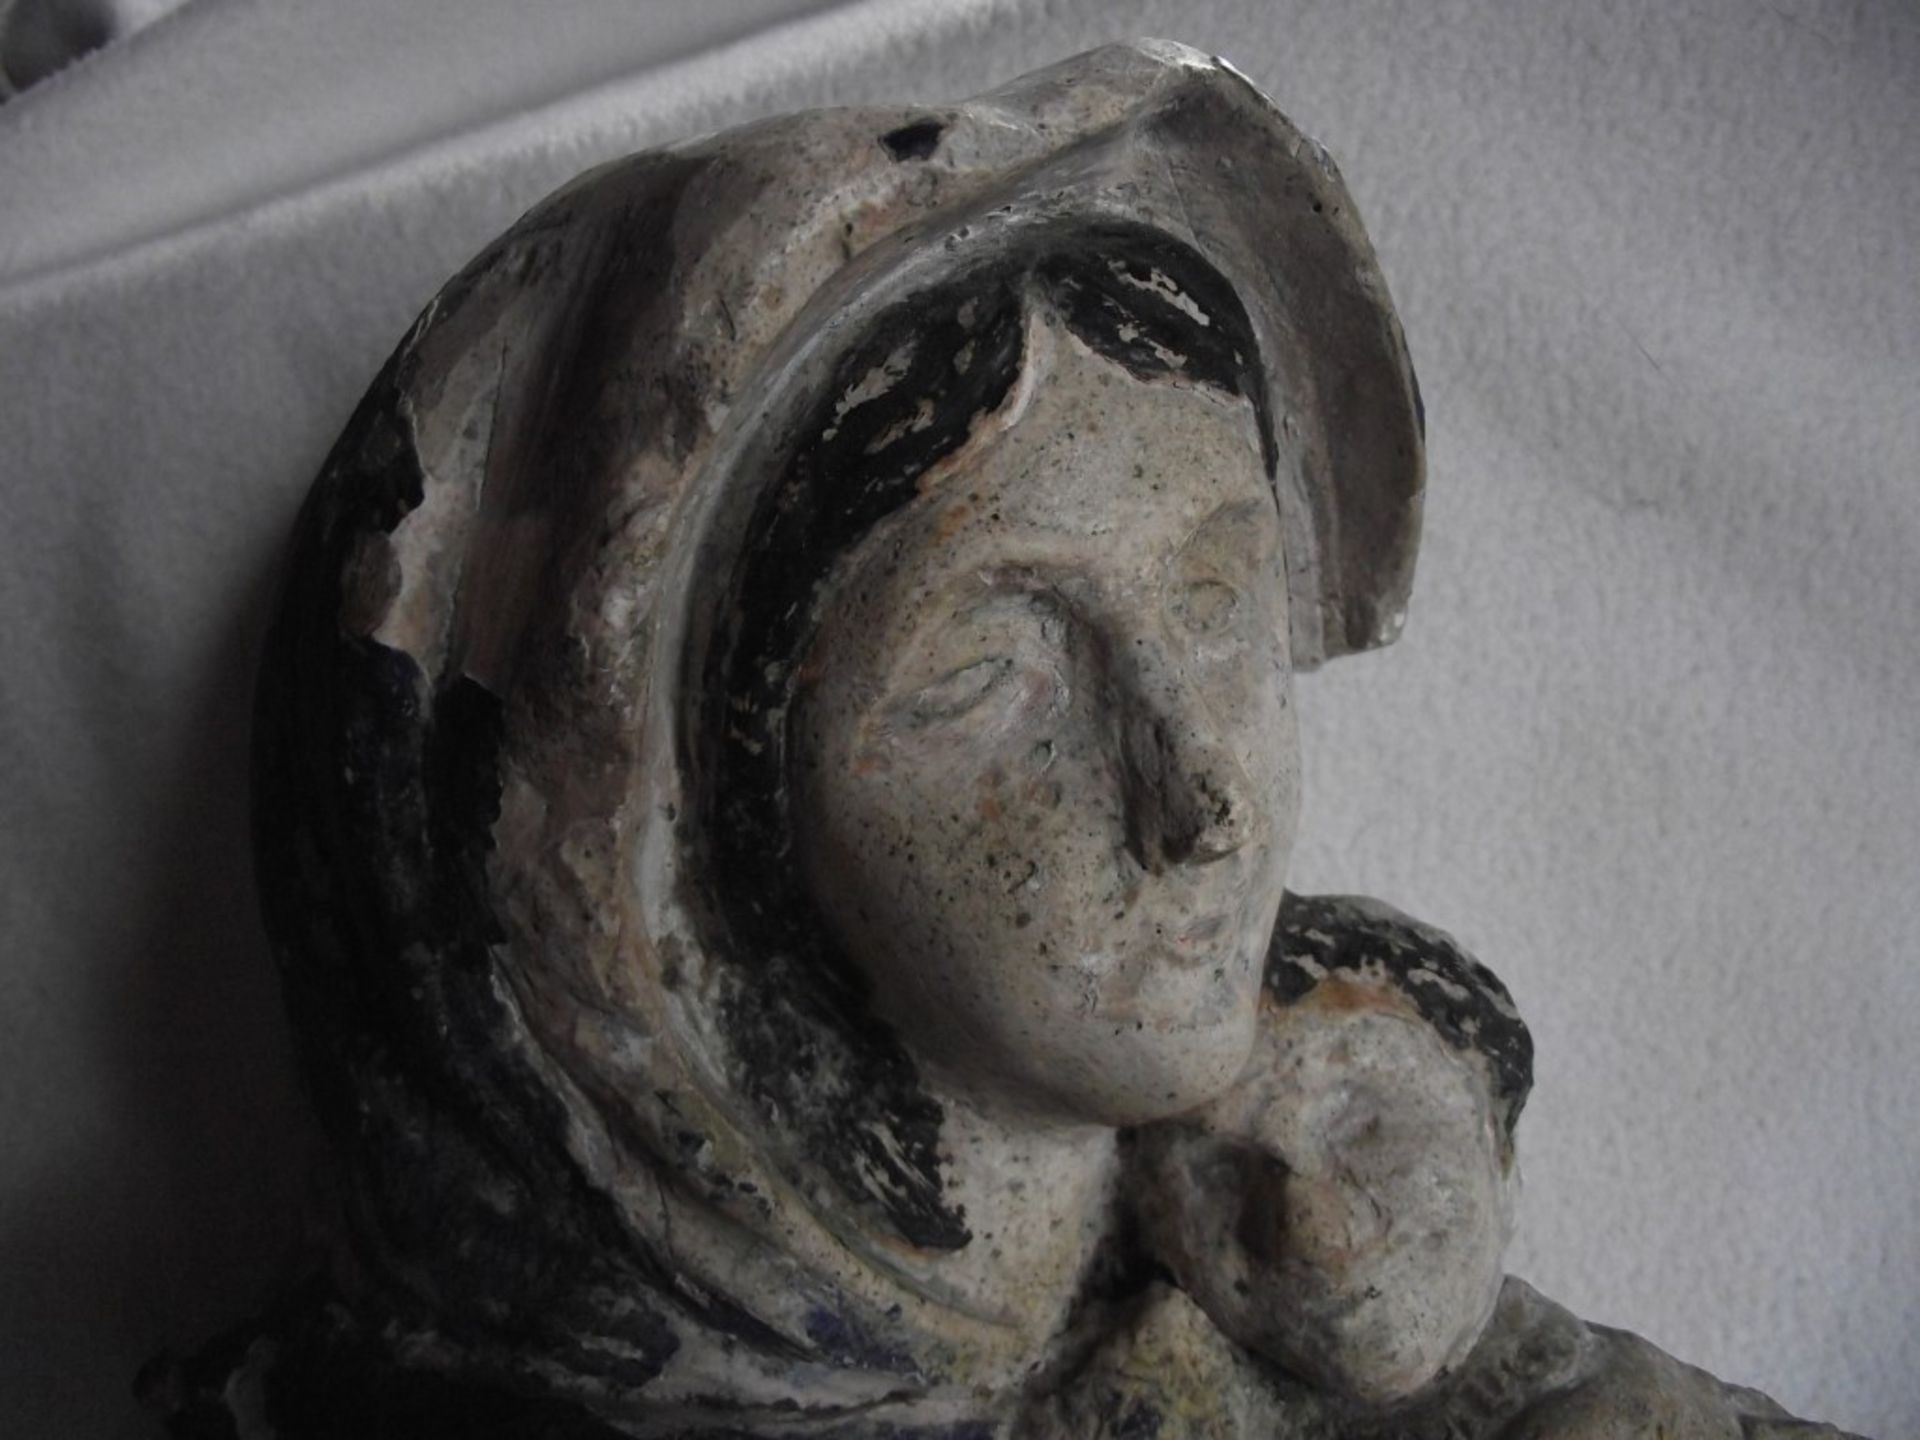 Antique Madonna & Child Wall Hanging Figure - 11 3/4"" High. - Image 4 of 21